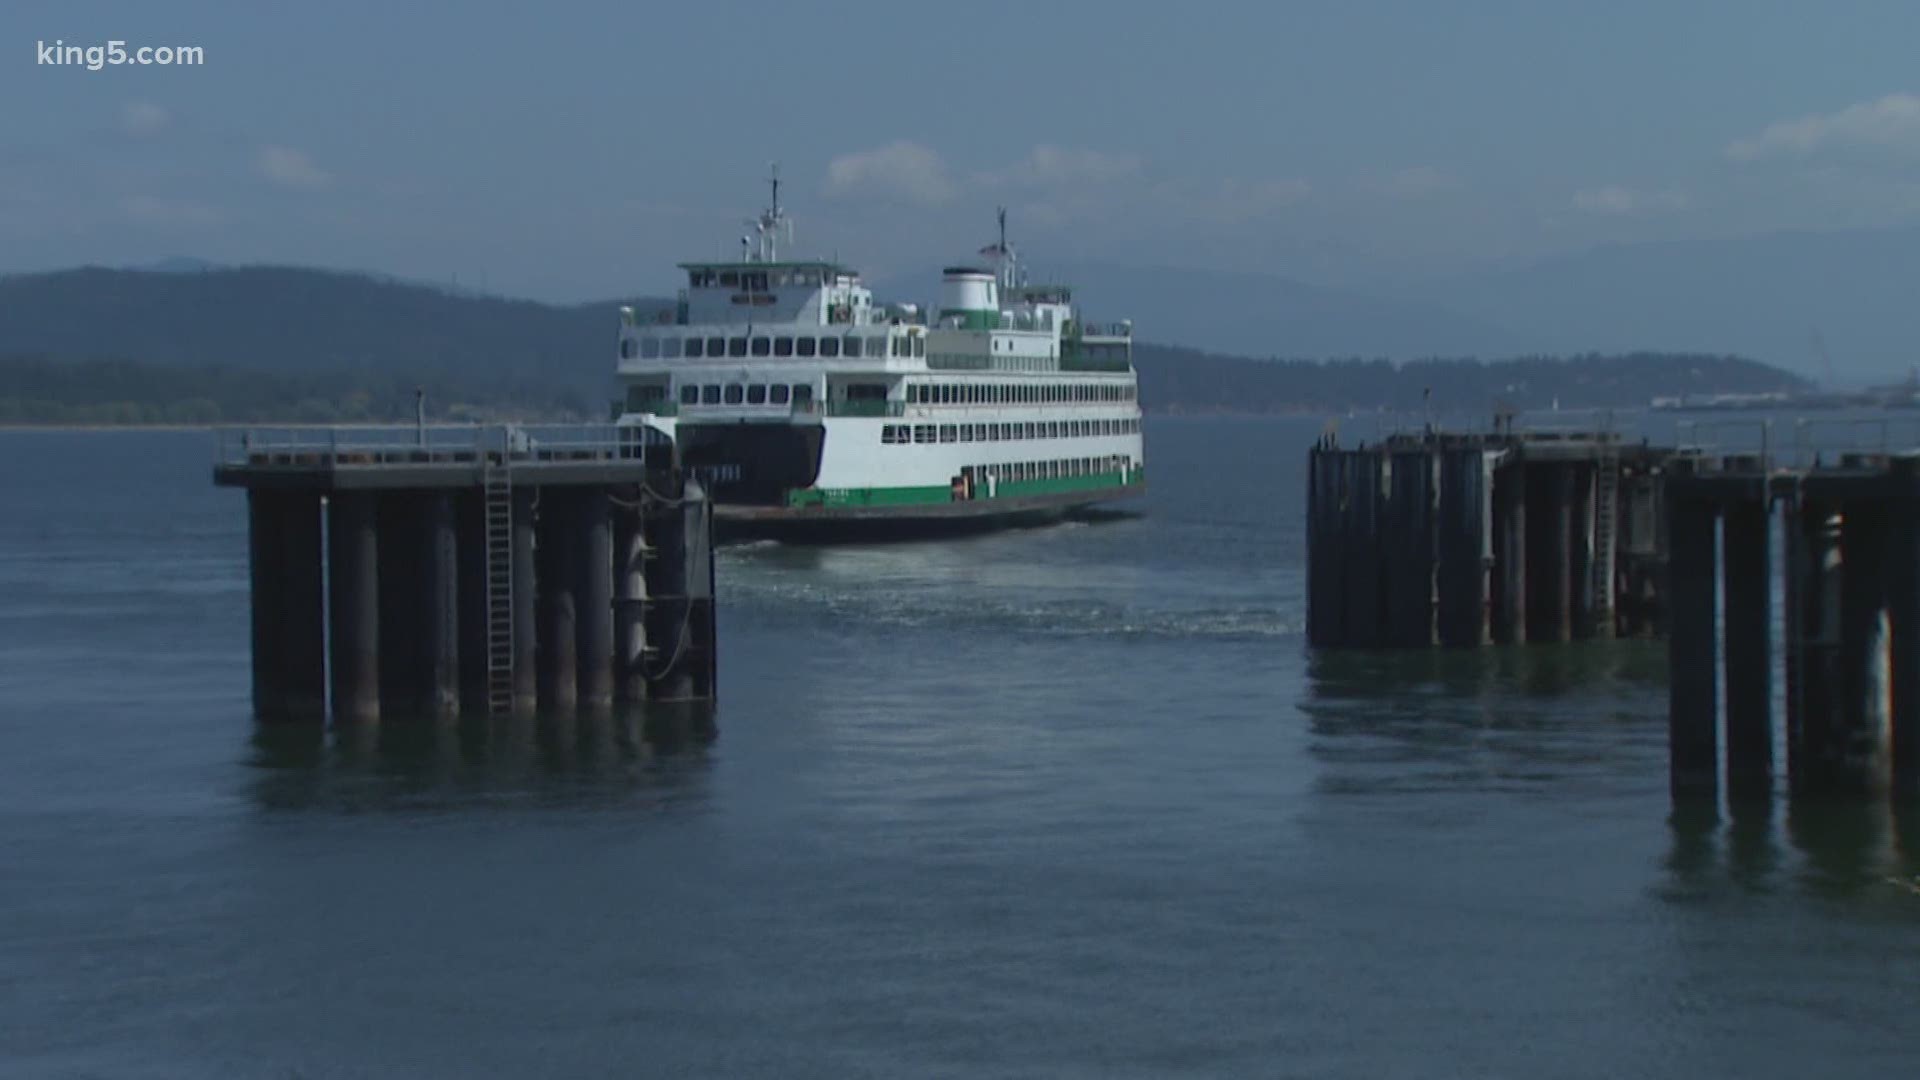 The Washington State Ferry system says fallout from coronavirus is to blame for long ferry lines.